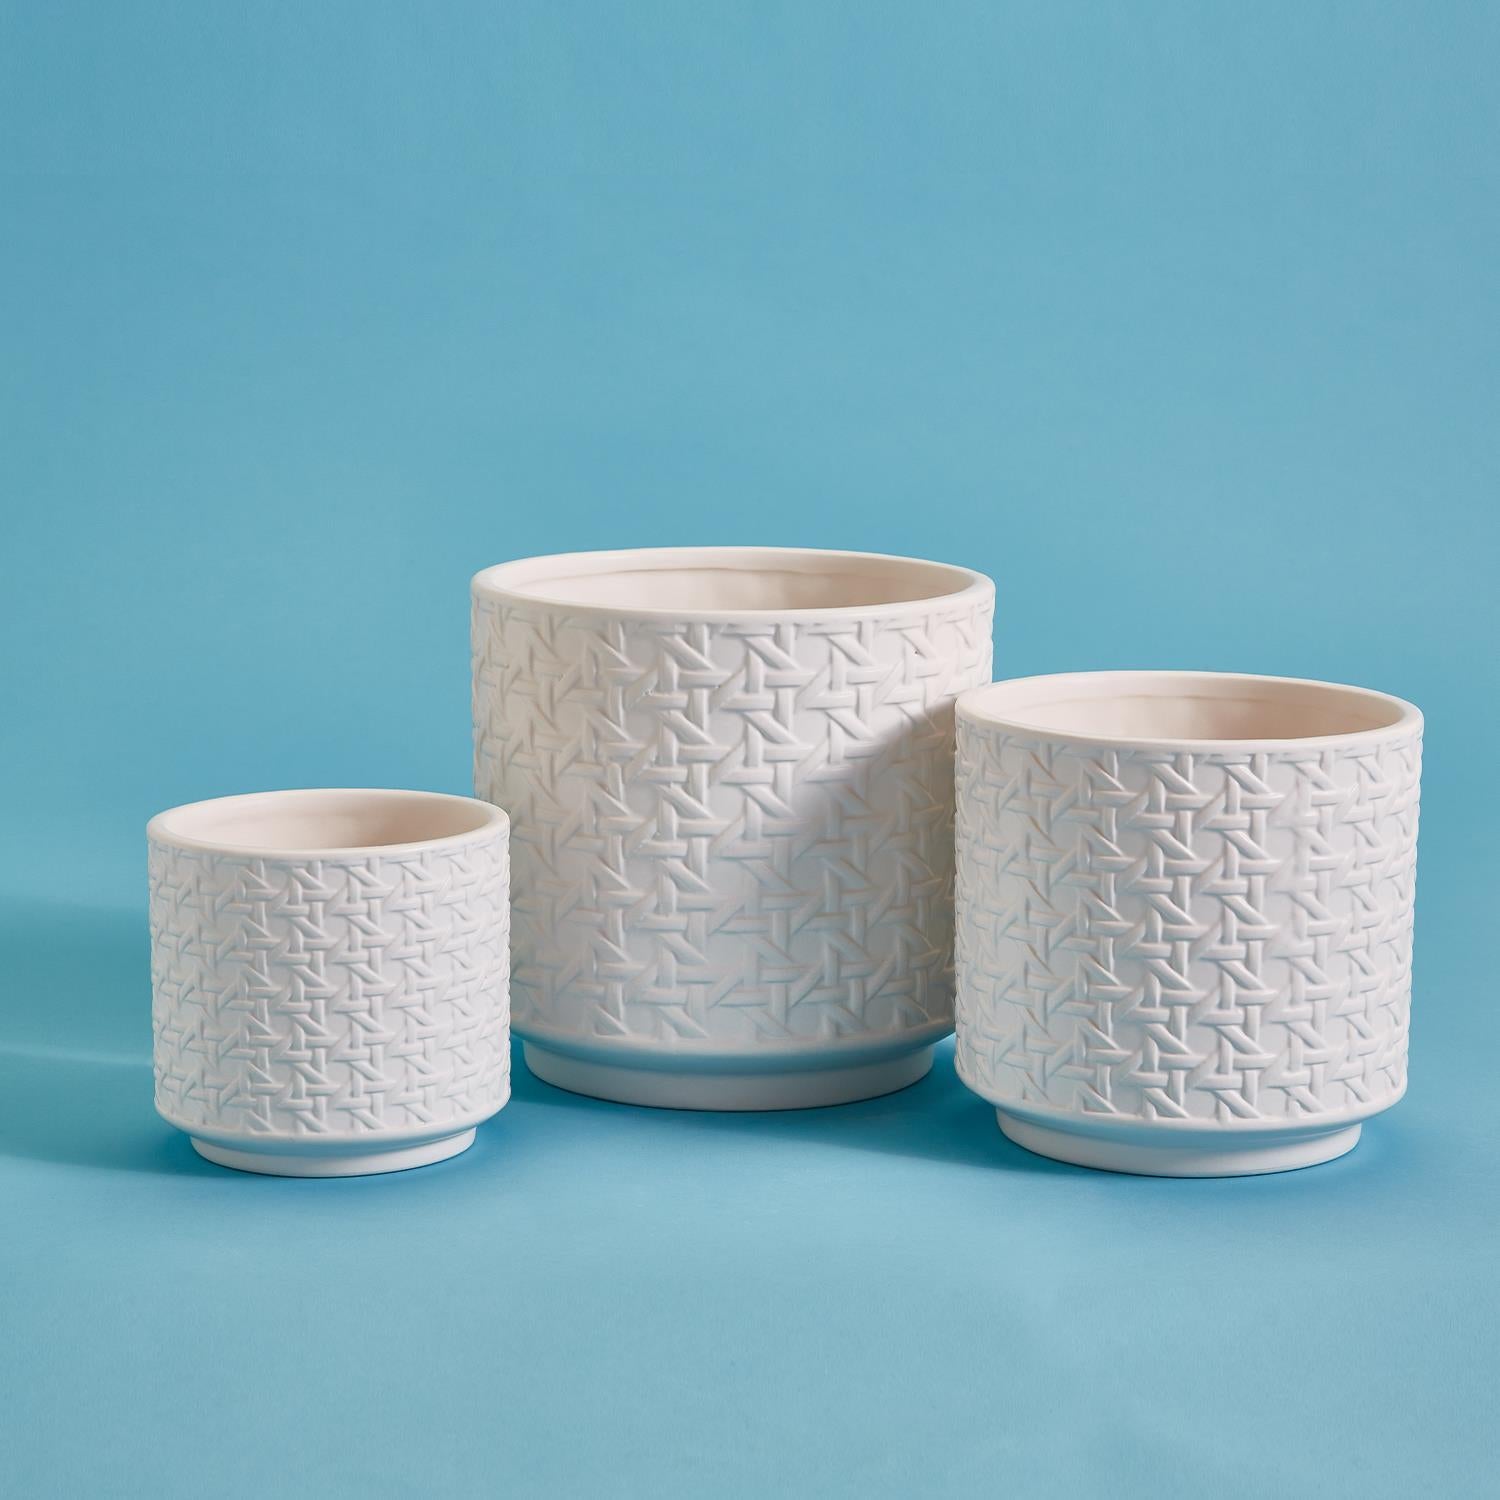 Two's Company S/3 Embossed Cane Webbing Planters